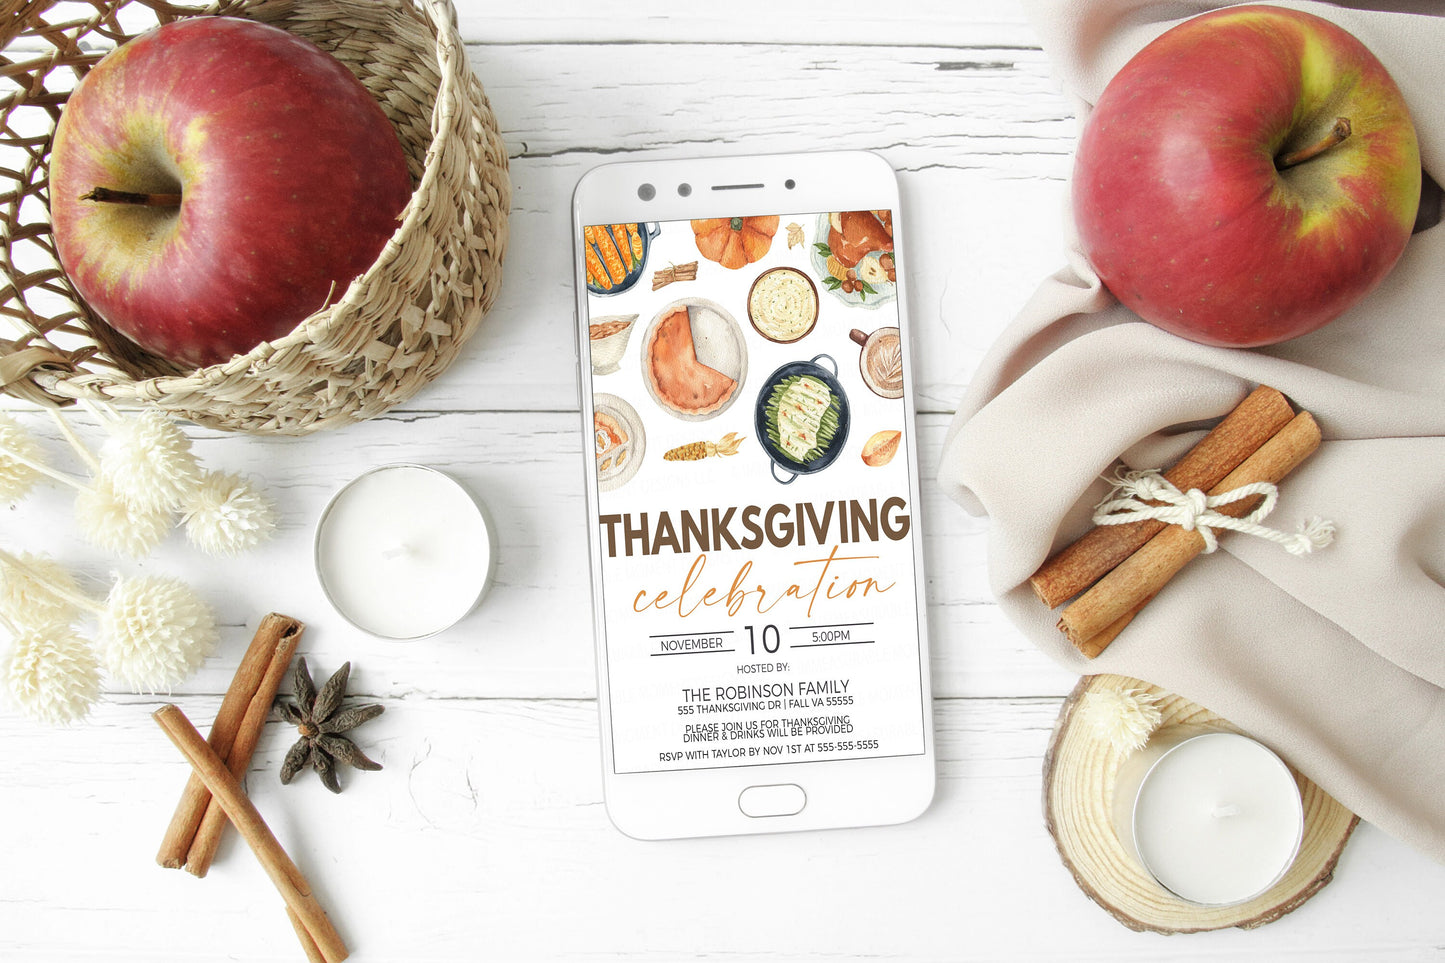 Editable Thanksgiving Invitation, Fall Celebration Party Invite, Turkey Dinner Lunch Luncheon, Thanksgiving Appreciation, Printable Template